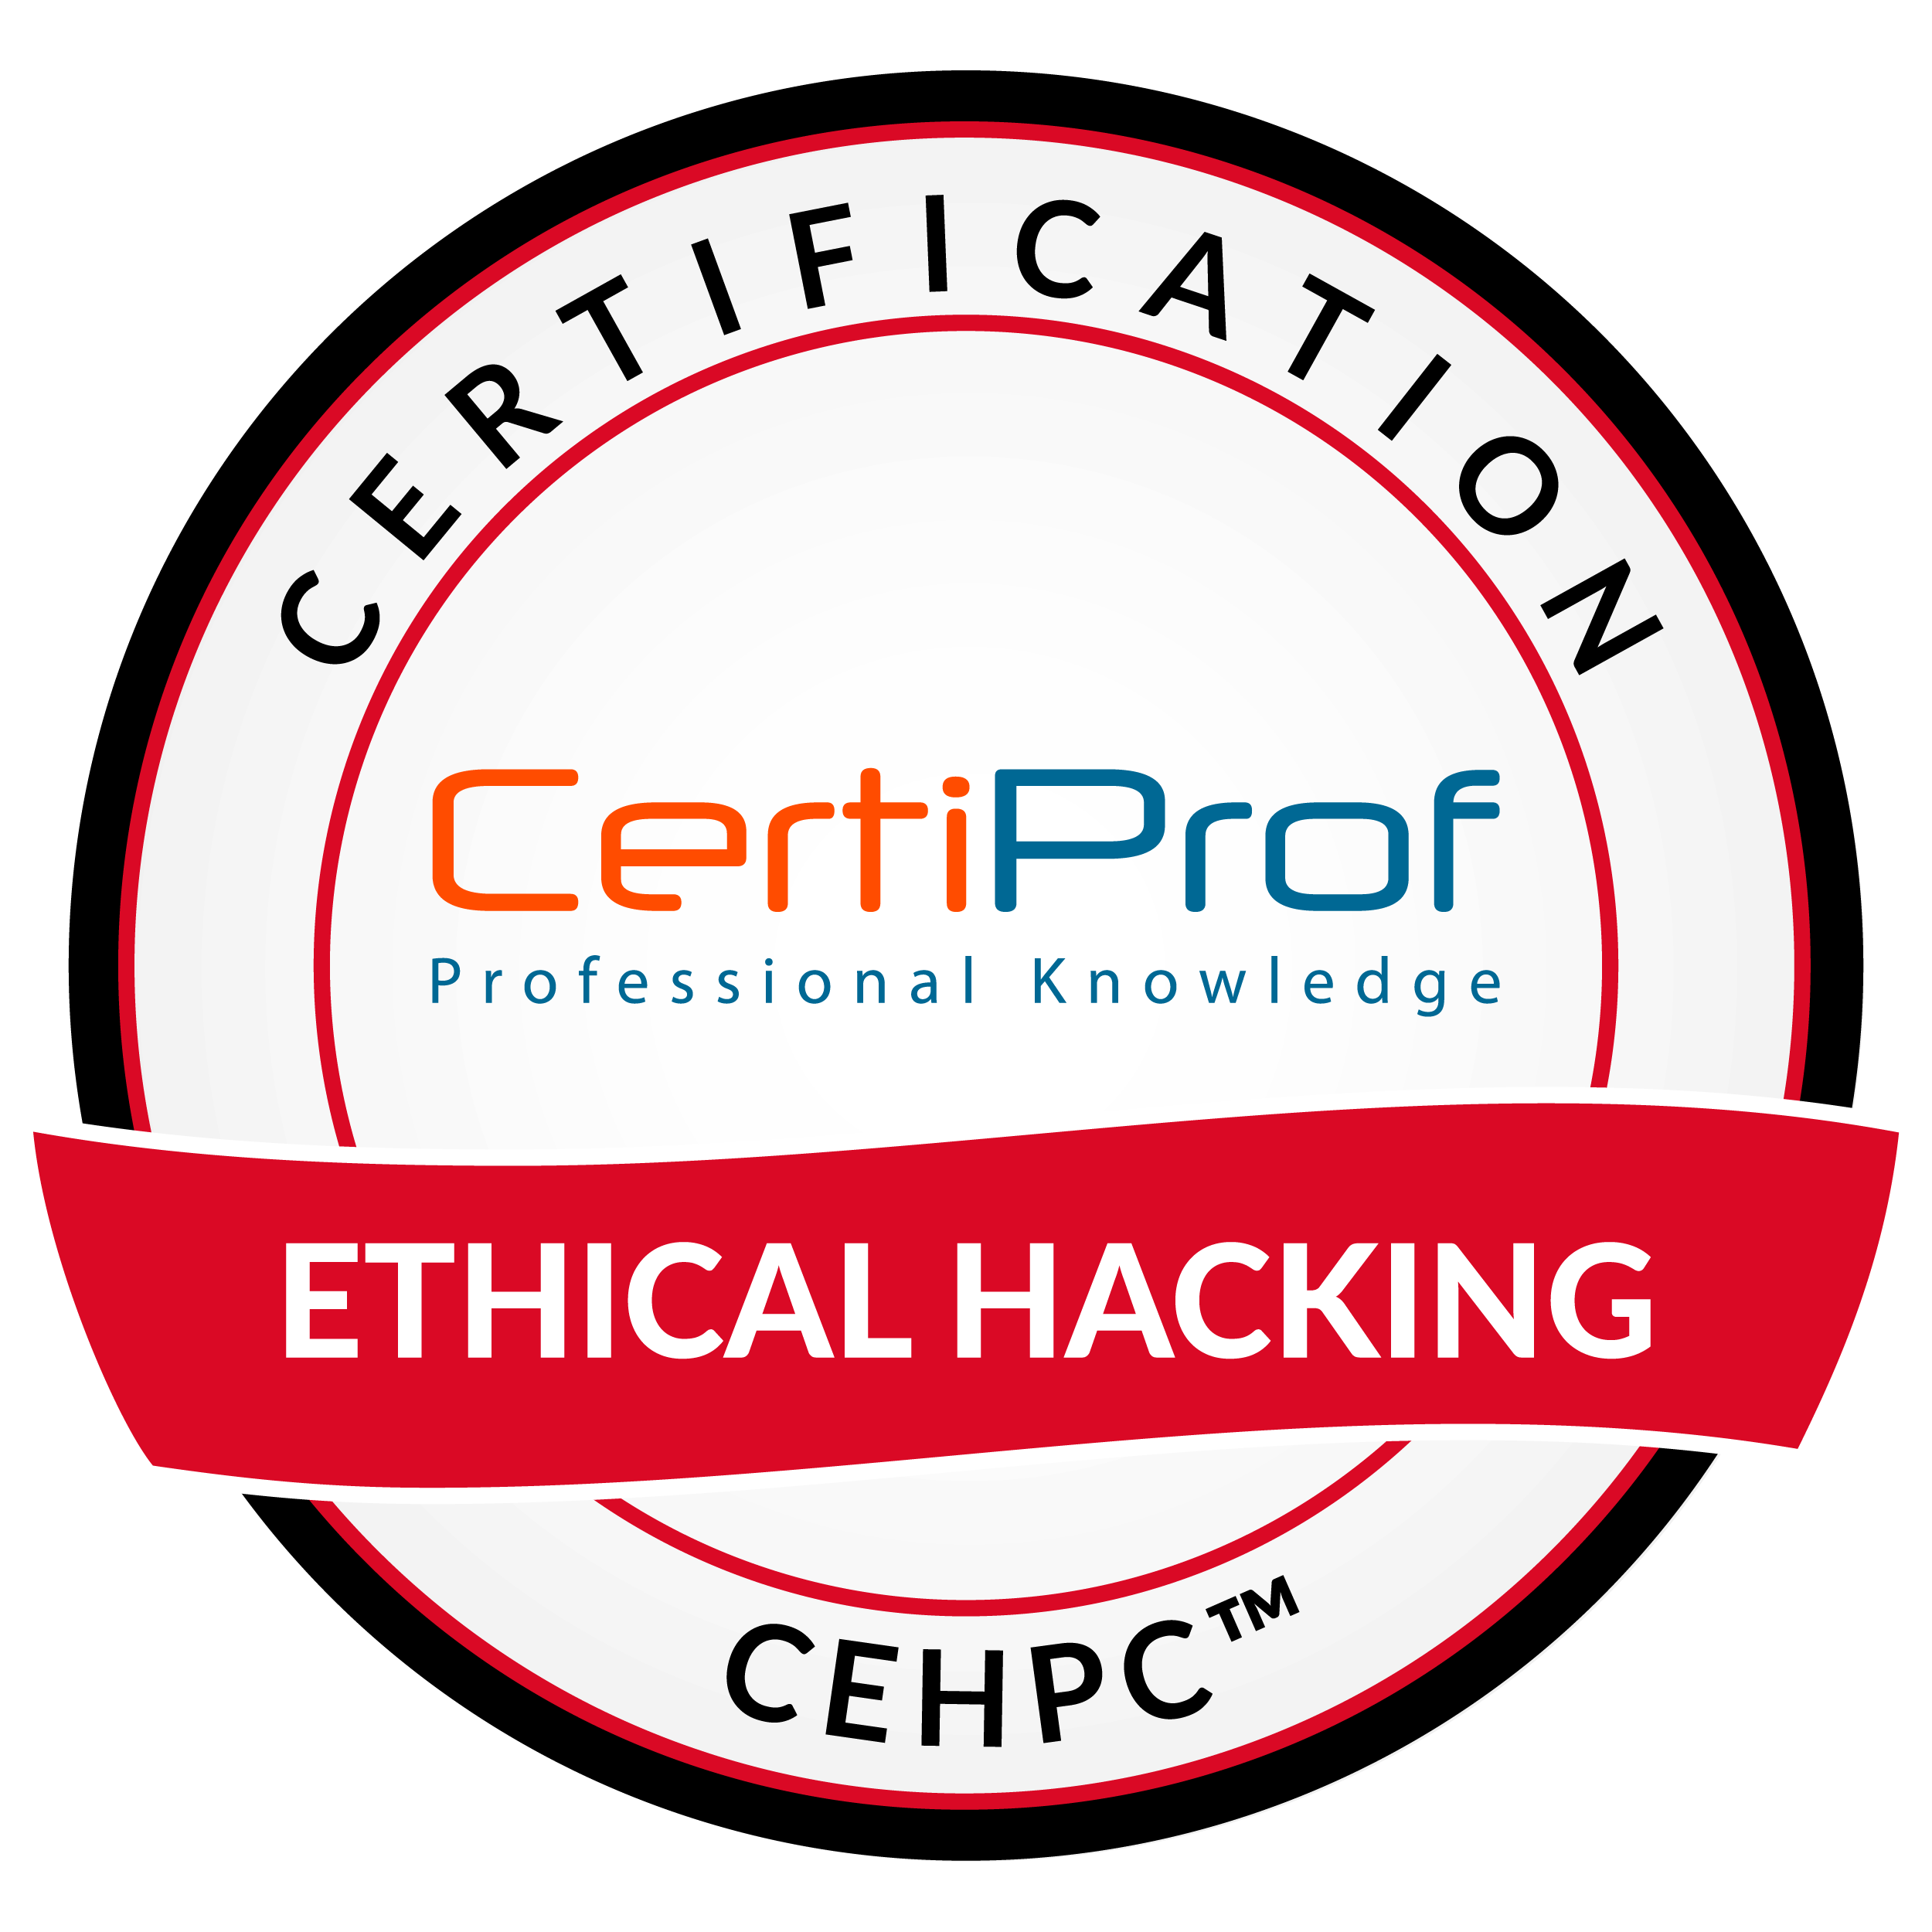 Ethical Hacking CEH Professional certificatio 